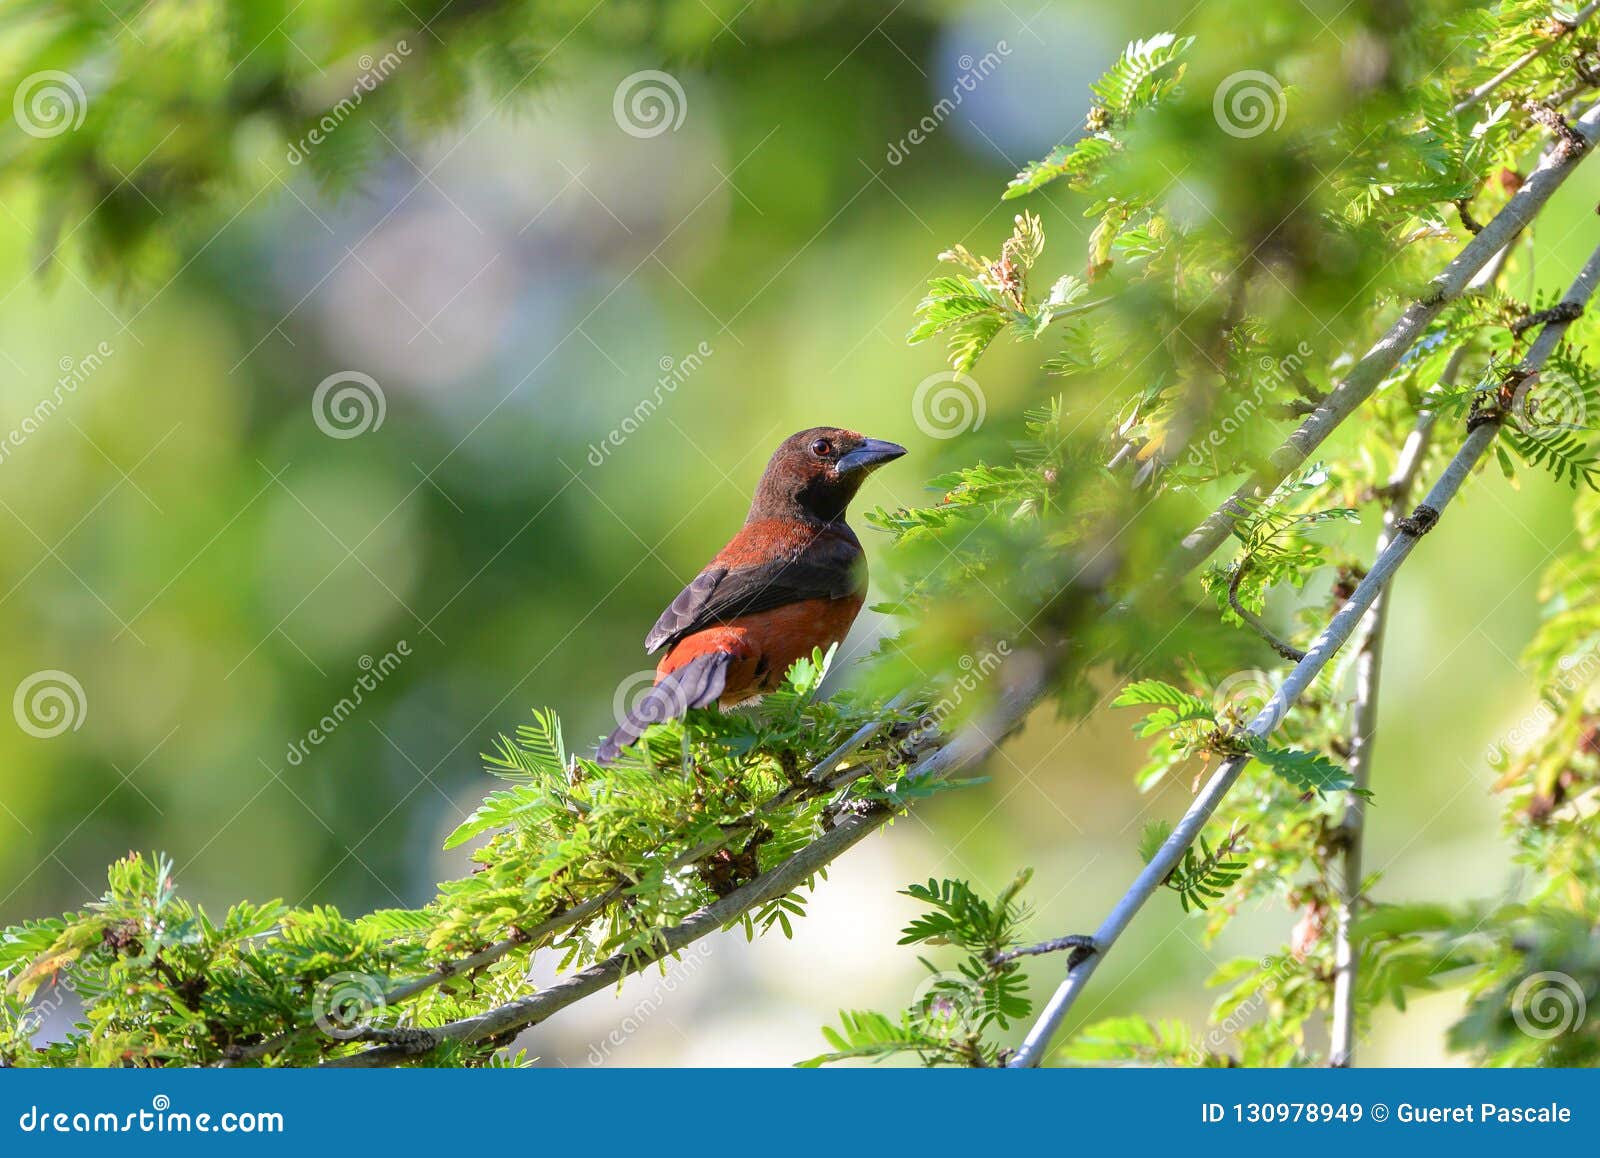 crimson-backed tanager